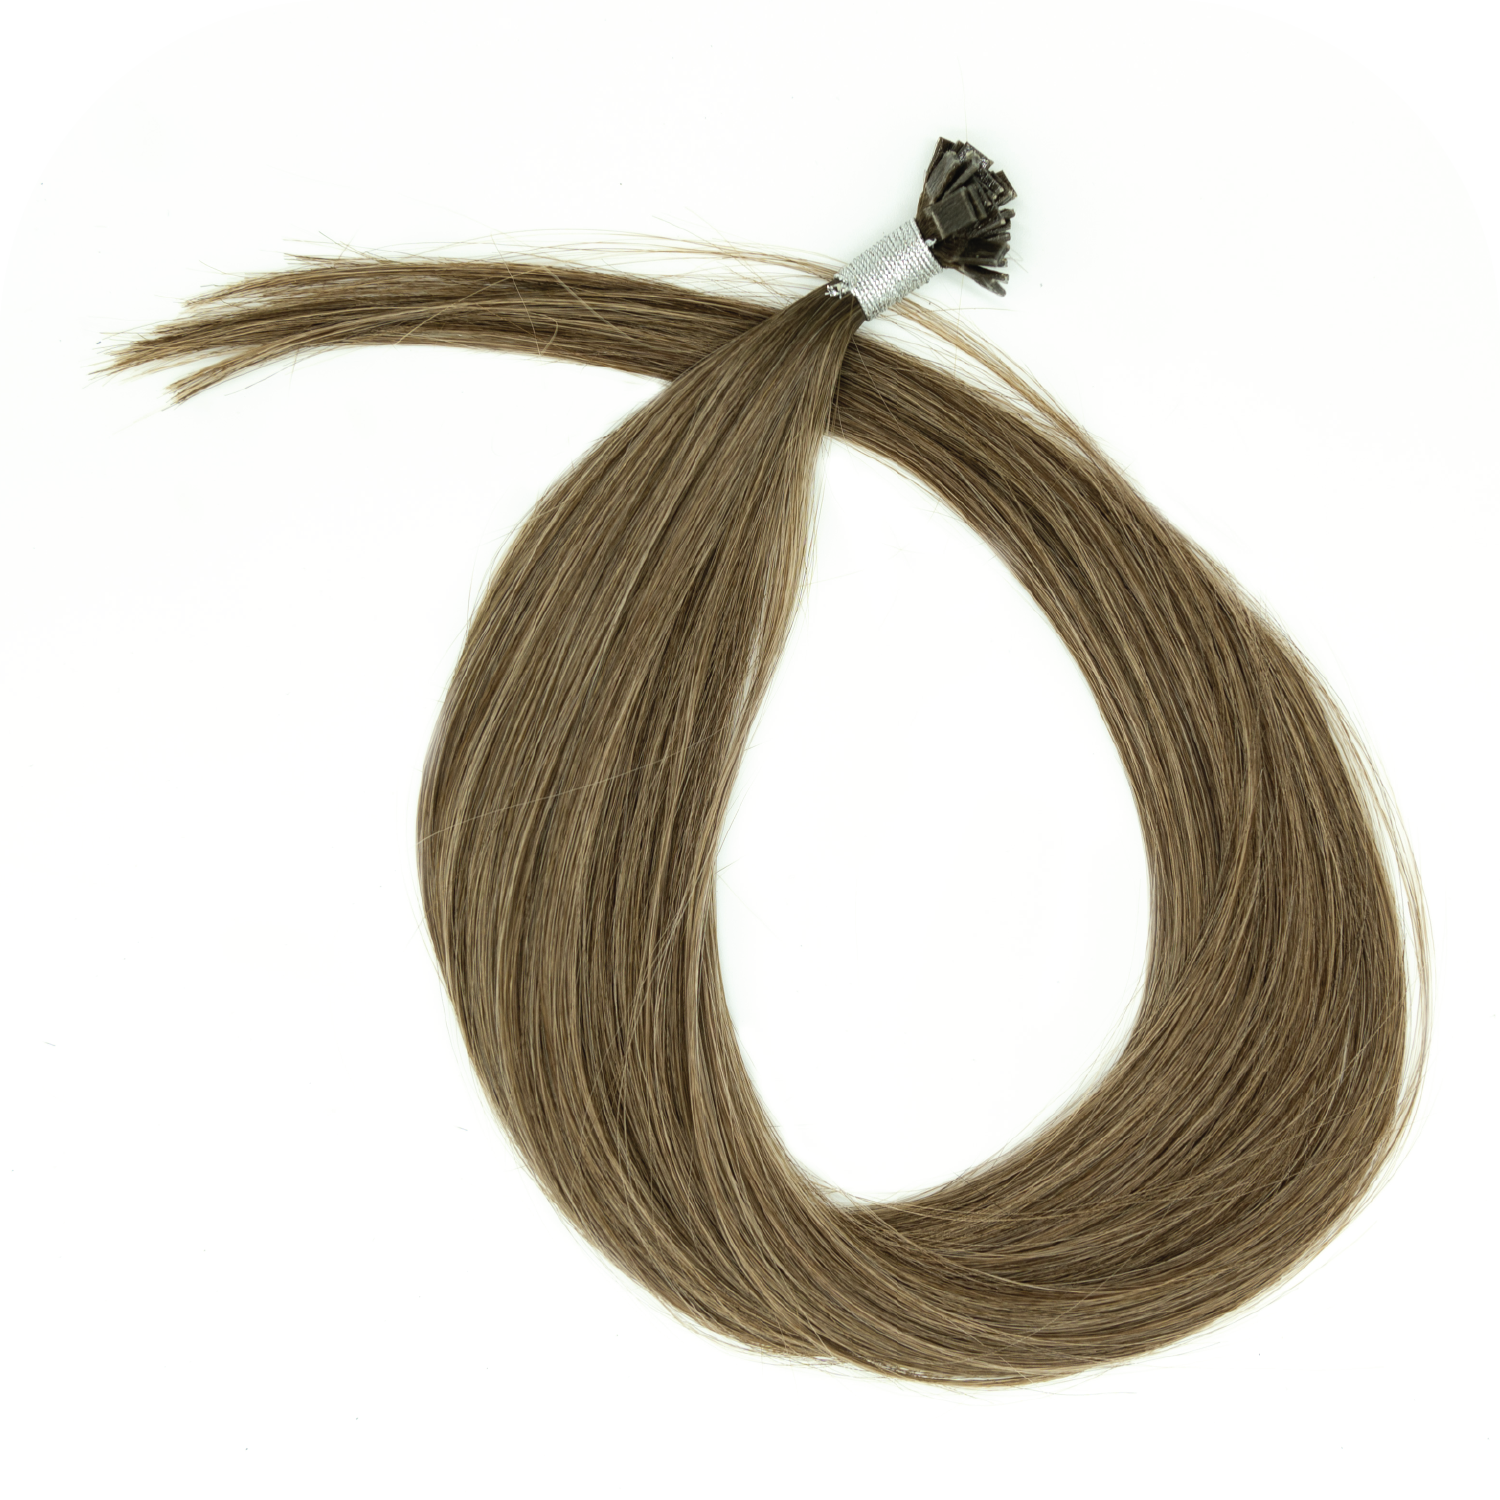 Couture Hair Co. Couture Tip or K Tip Extensions in Color Brown Mix 